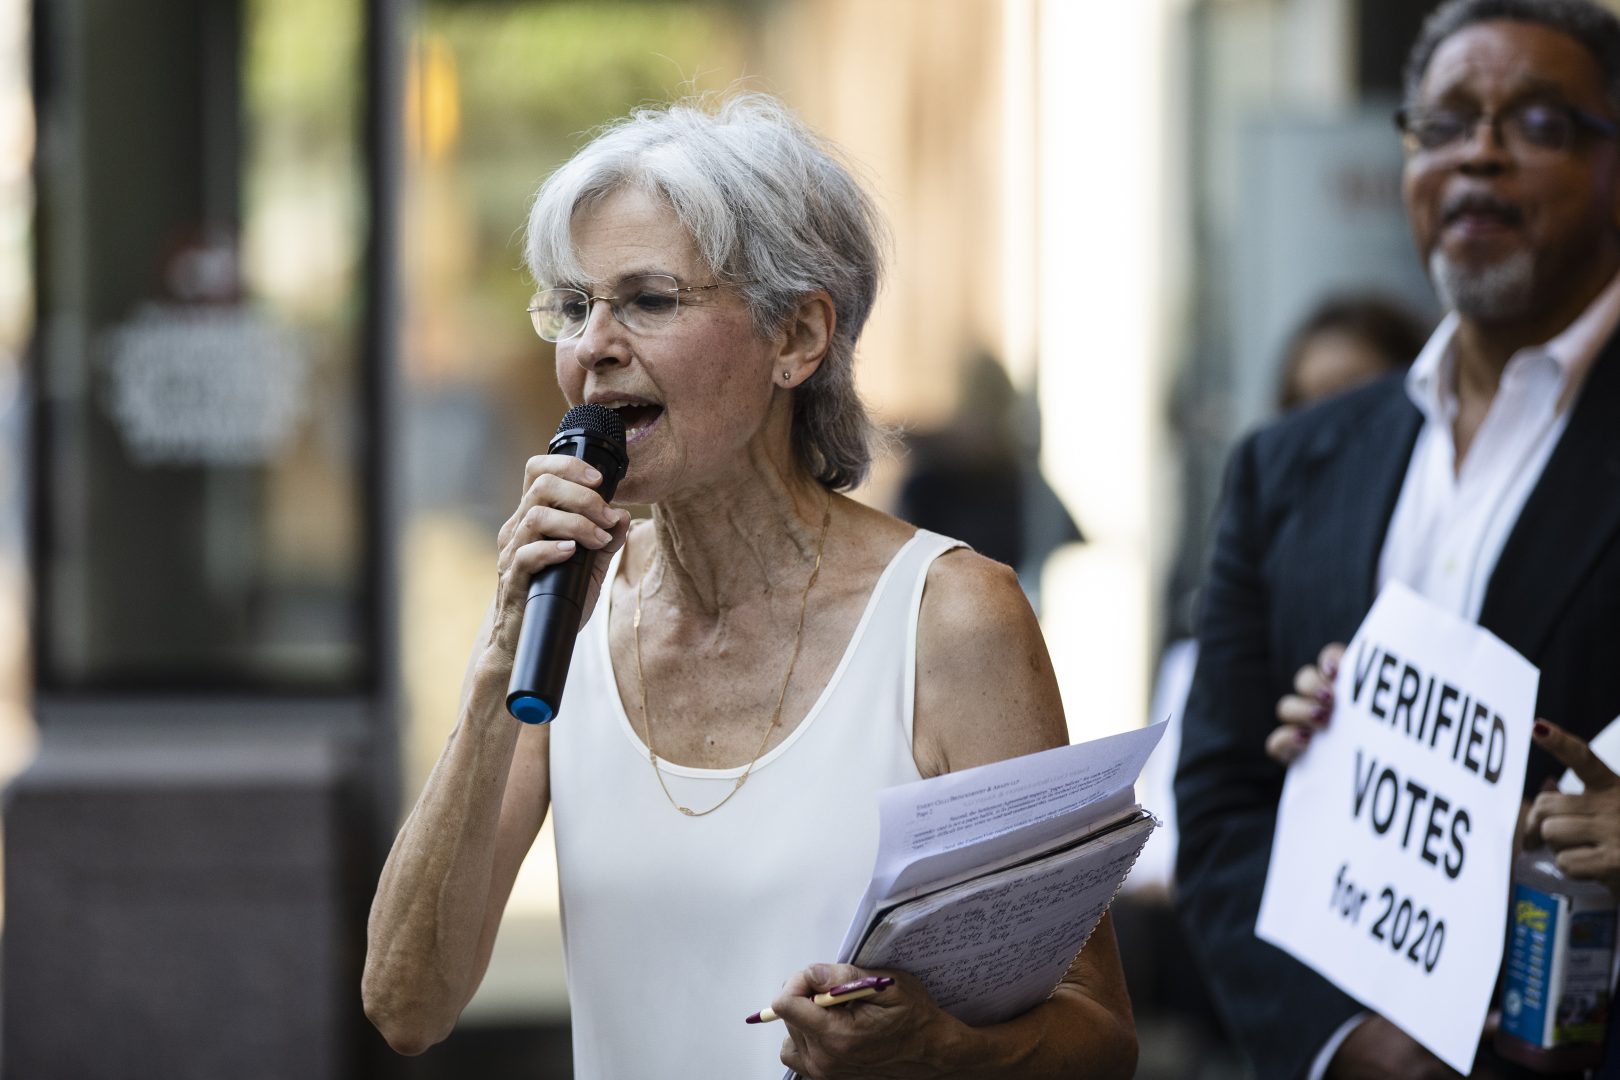 Former Green Party presidential candidate Jill Stein speaks outside the federal courthouse in Philadelphia, Wednesday, Oct. 2, 2019. Stein wants Pennsylvania to block Philadelphia from using new touchscreen machines it's buying ahead of 2020's elections and is threatening court action if it doesn't do so promptly. 